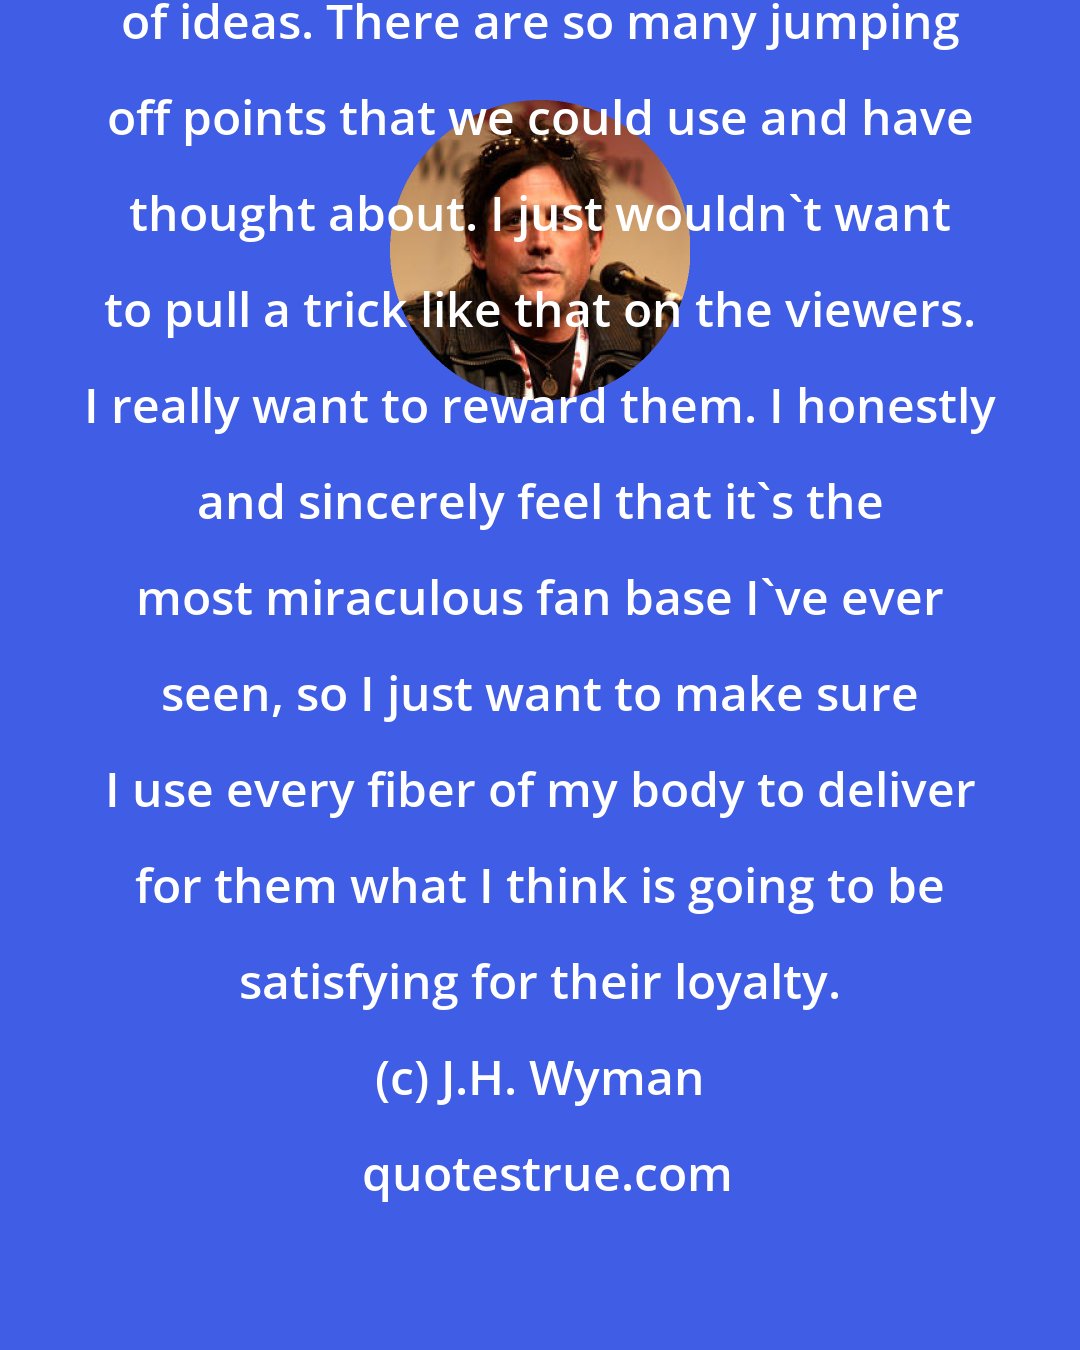 J.H. Wyman: One thing Fringe has is no shortage of ideas. There are so many jumping off points that we could use and have thought about. I just wouldn't want to pull a trick like that on the viewers. I really want to reward them. I honestly and sincerely feel that it's the most miraculous fan base I've ever seen, so I just want to make sure I use every fiber of my body to deliver for them what I think is going to be satisfying for their loyalty.